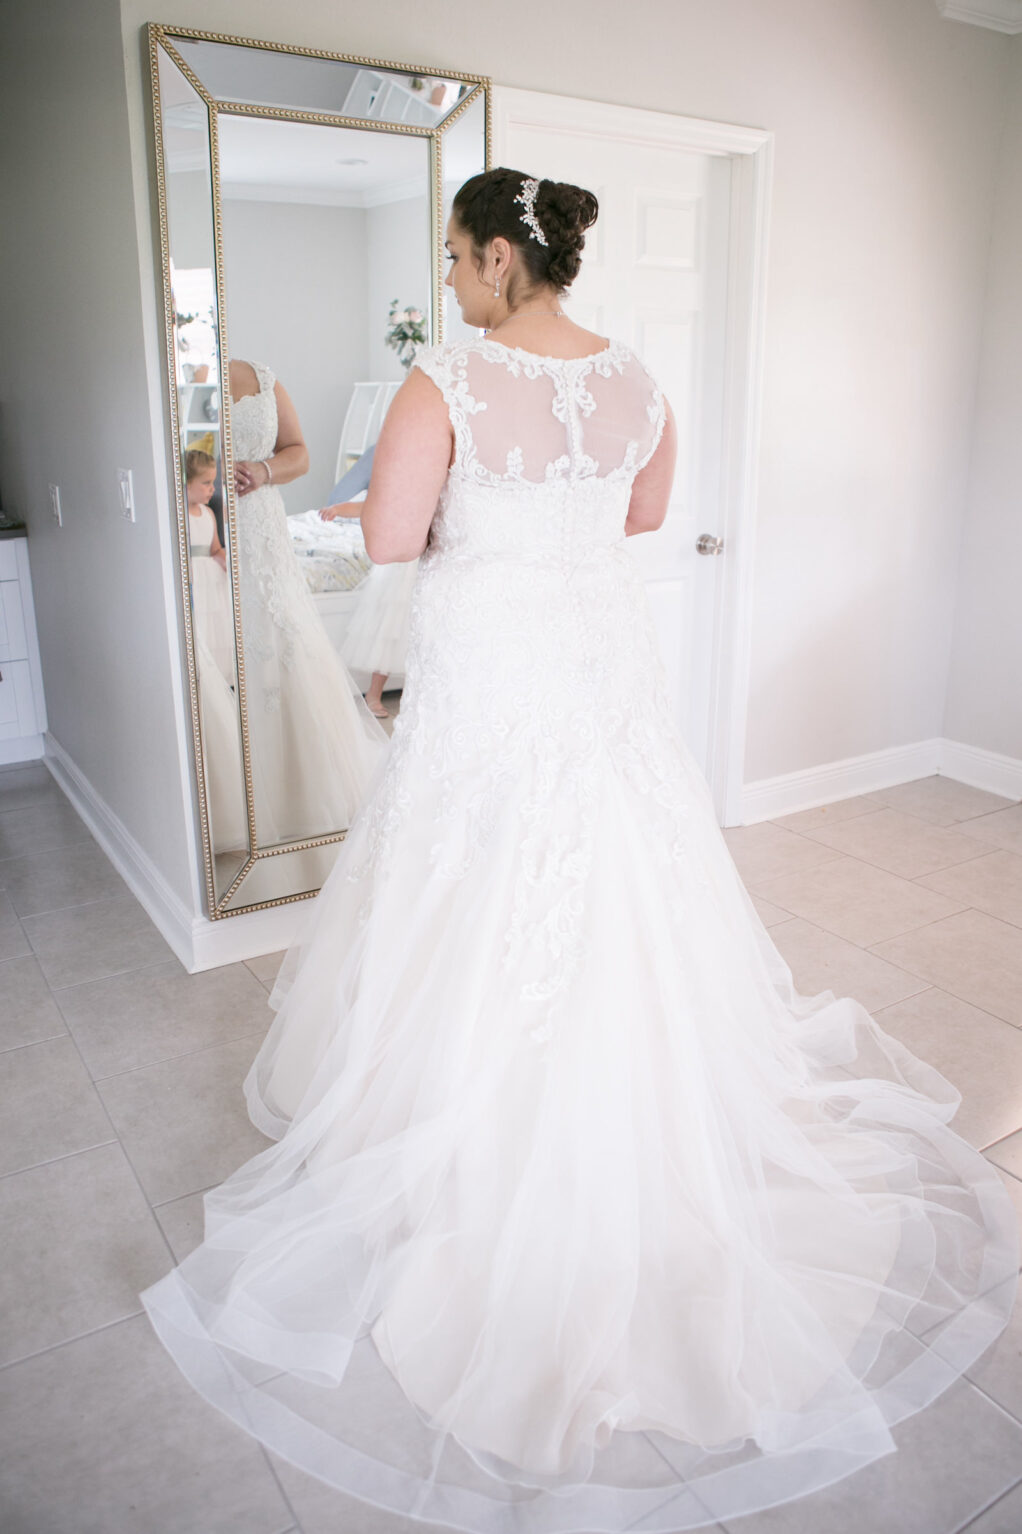 Lace Illusion Back Wedding Dress | Carrie Wildes Photography